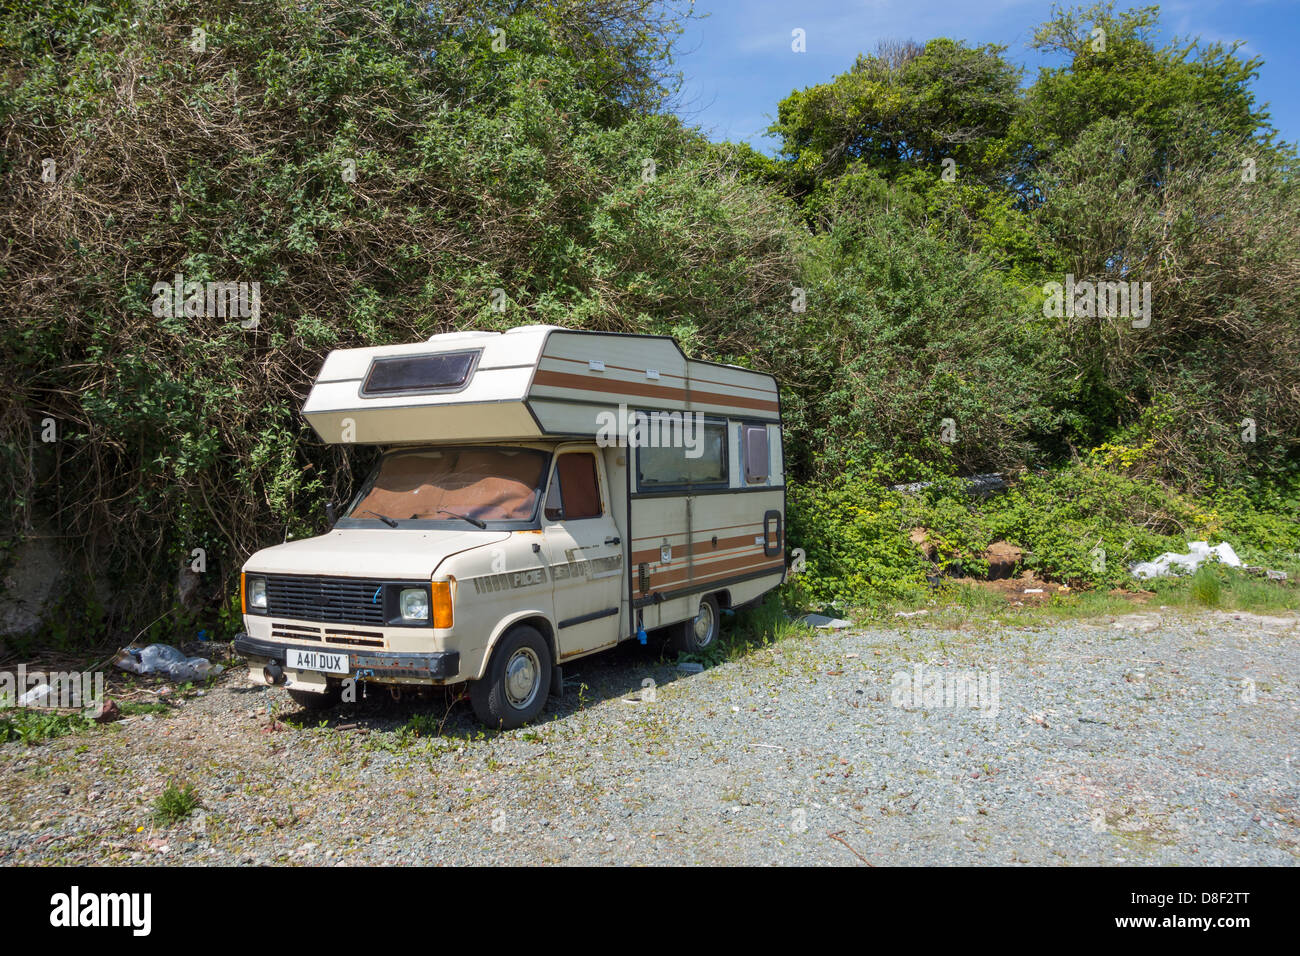 An abandoned motor home which has been vandalized at the roadside. Stock Photo